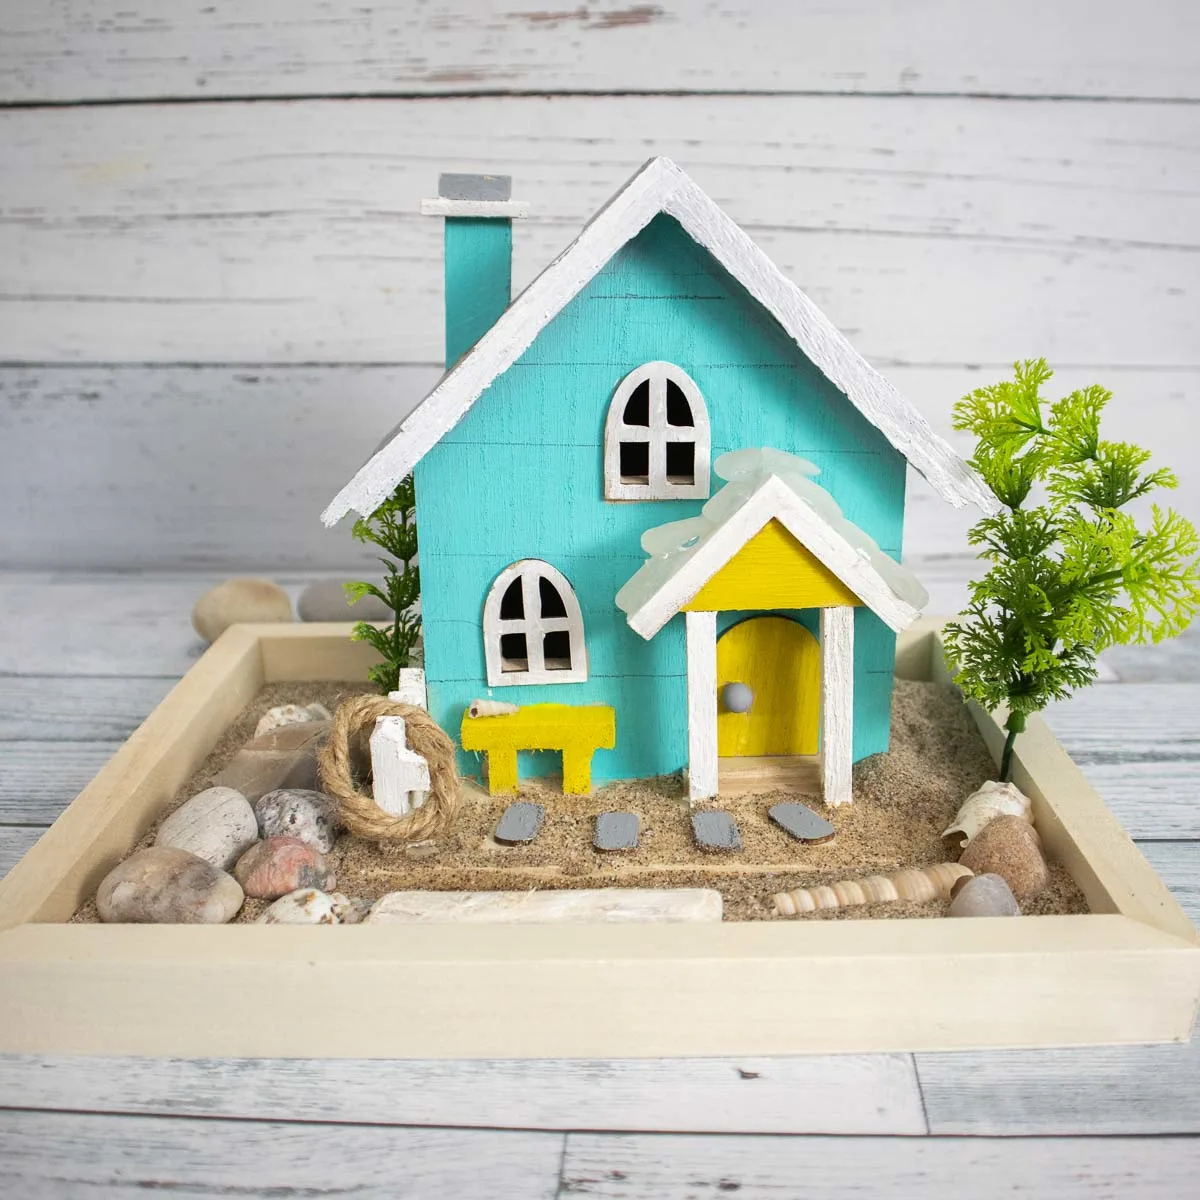 Painted wooden beach house placed in sand and embellished with driftwood, sea glass and shells.